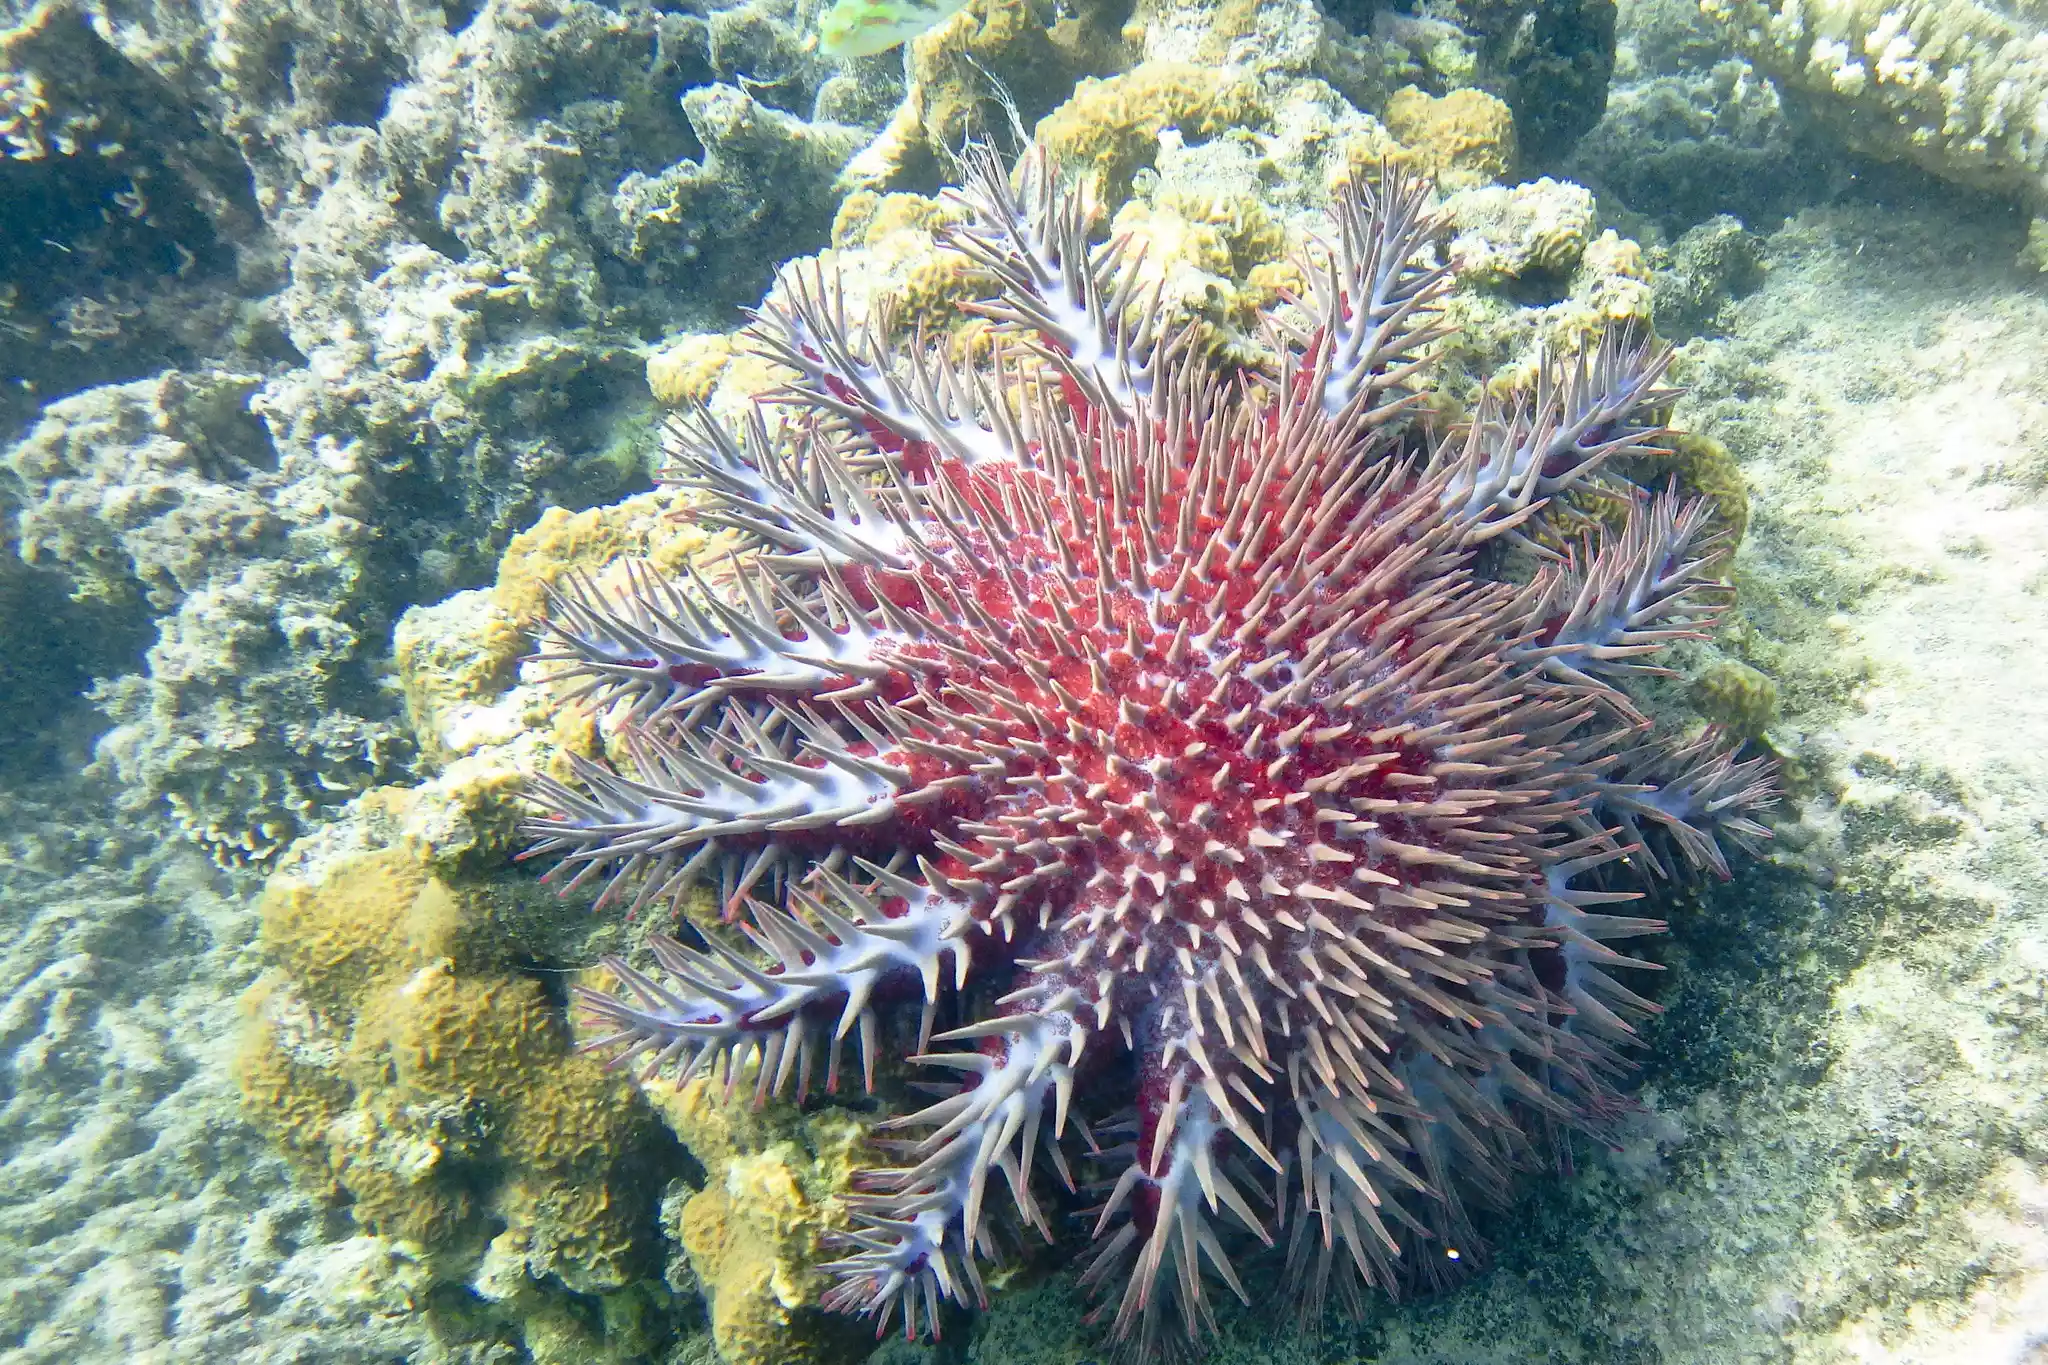 large thorny sea star on dead coral